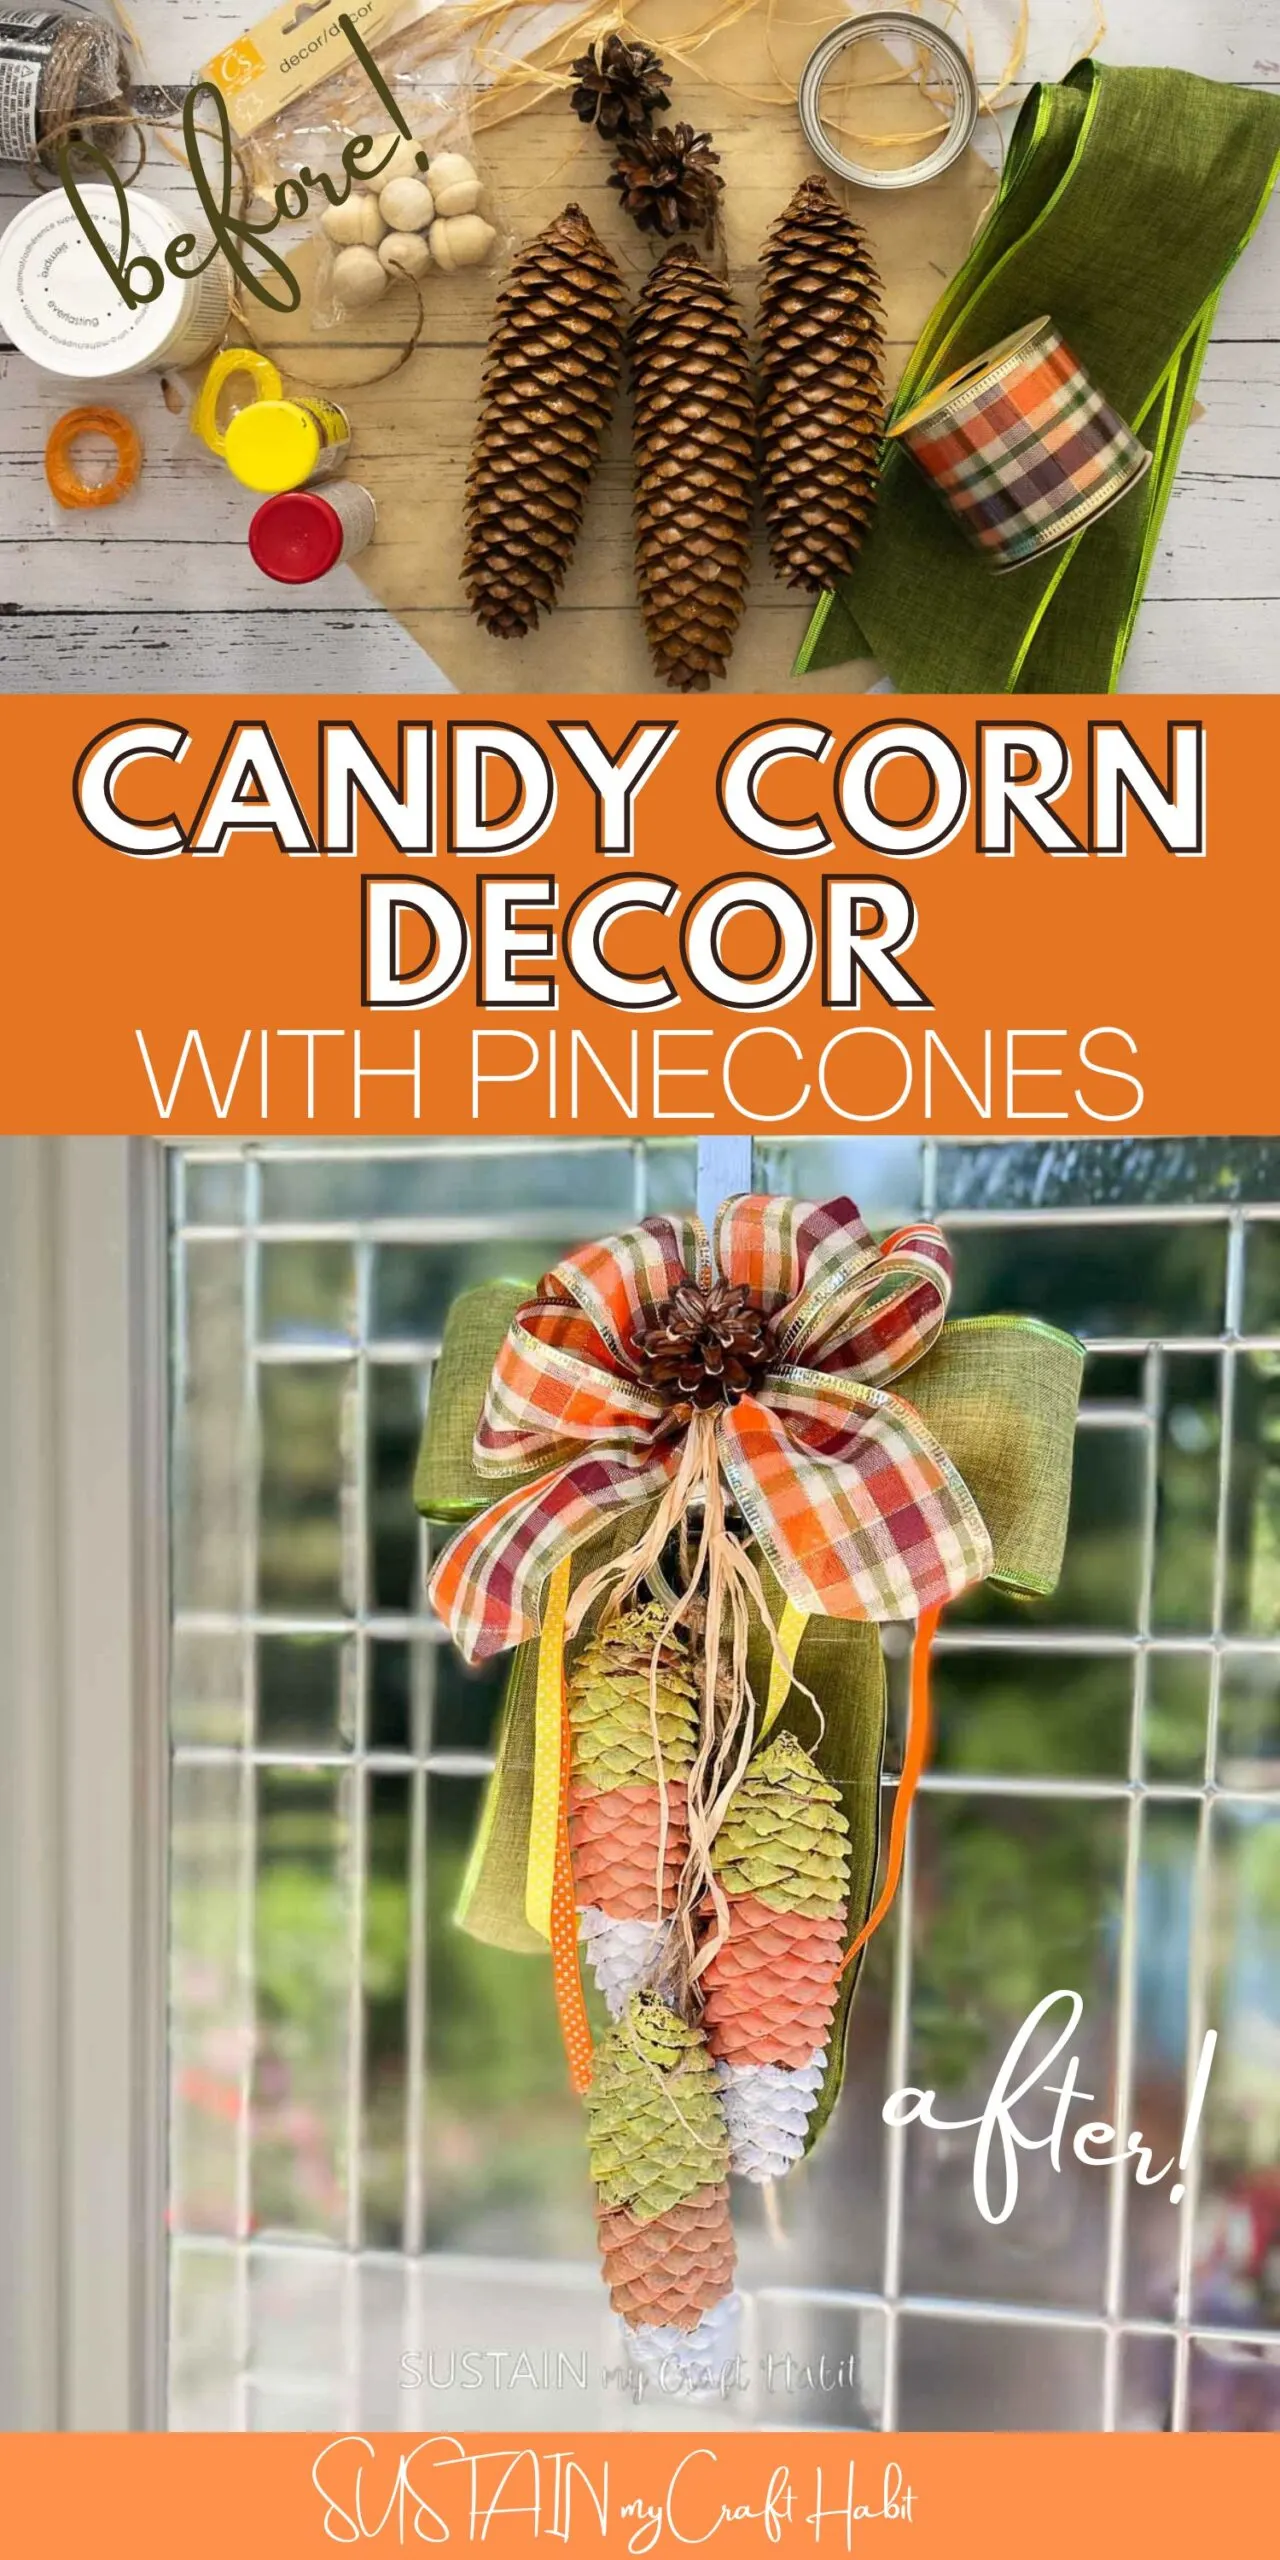 Collage of materials and finished candy corn decor made with pinecones.